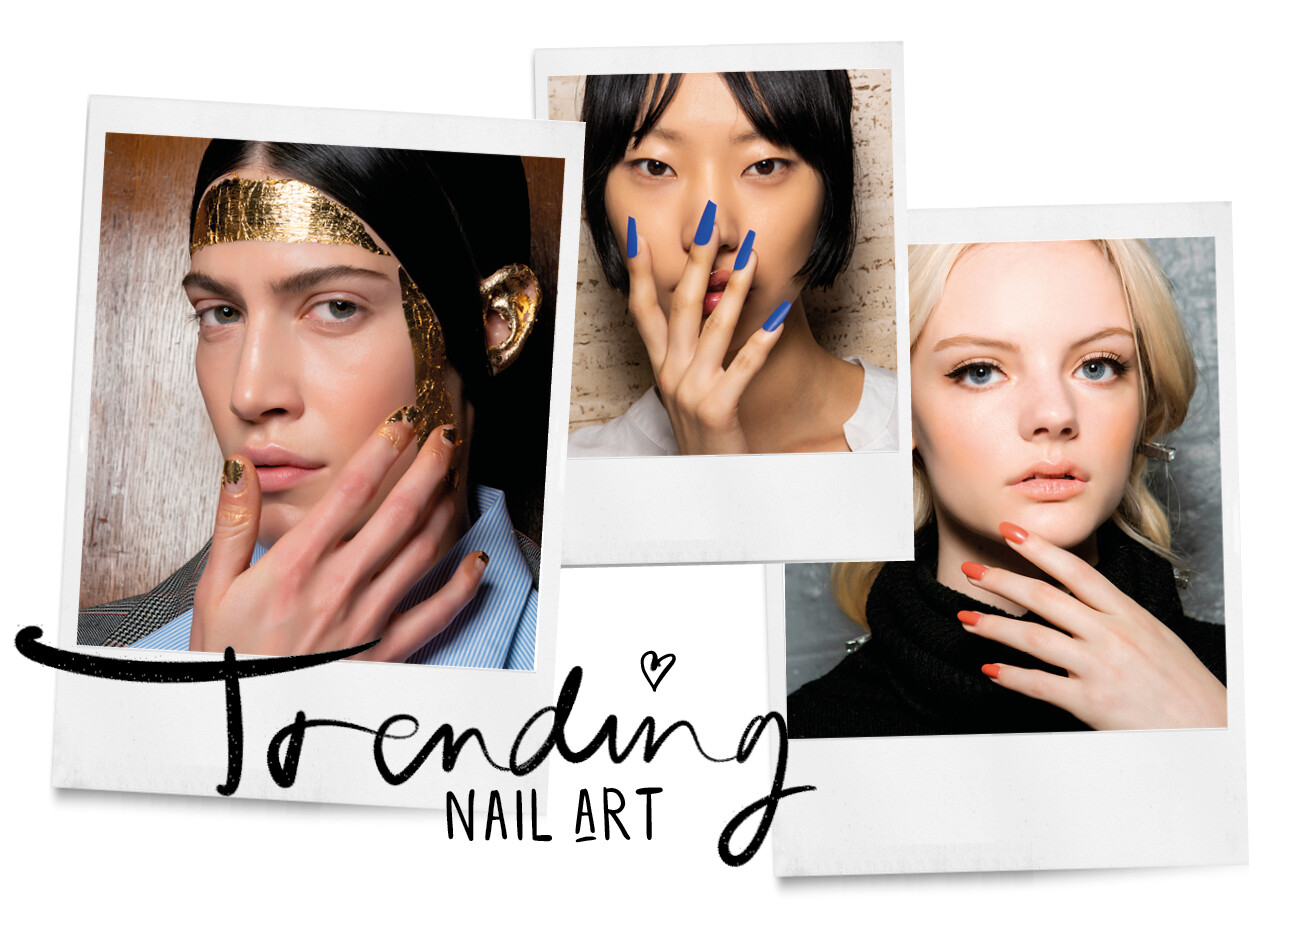 NAIL TREND